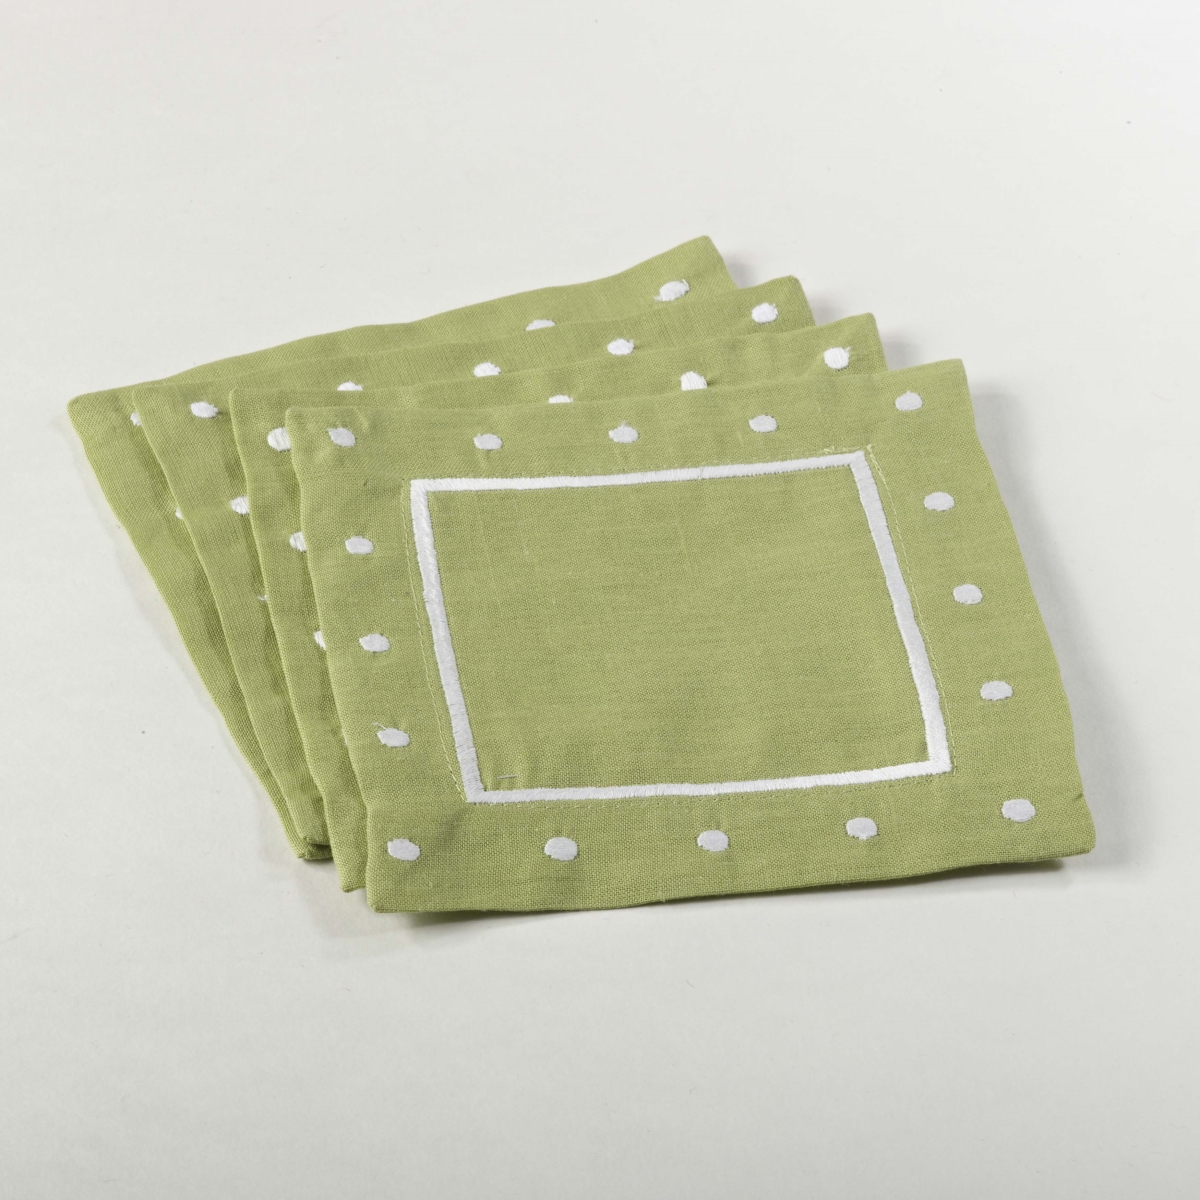 7551.lm6s 6 In. Velveteen Square Embroidered Coaster With Dotted Border - Lime, Set Of 4